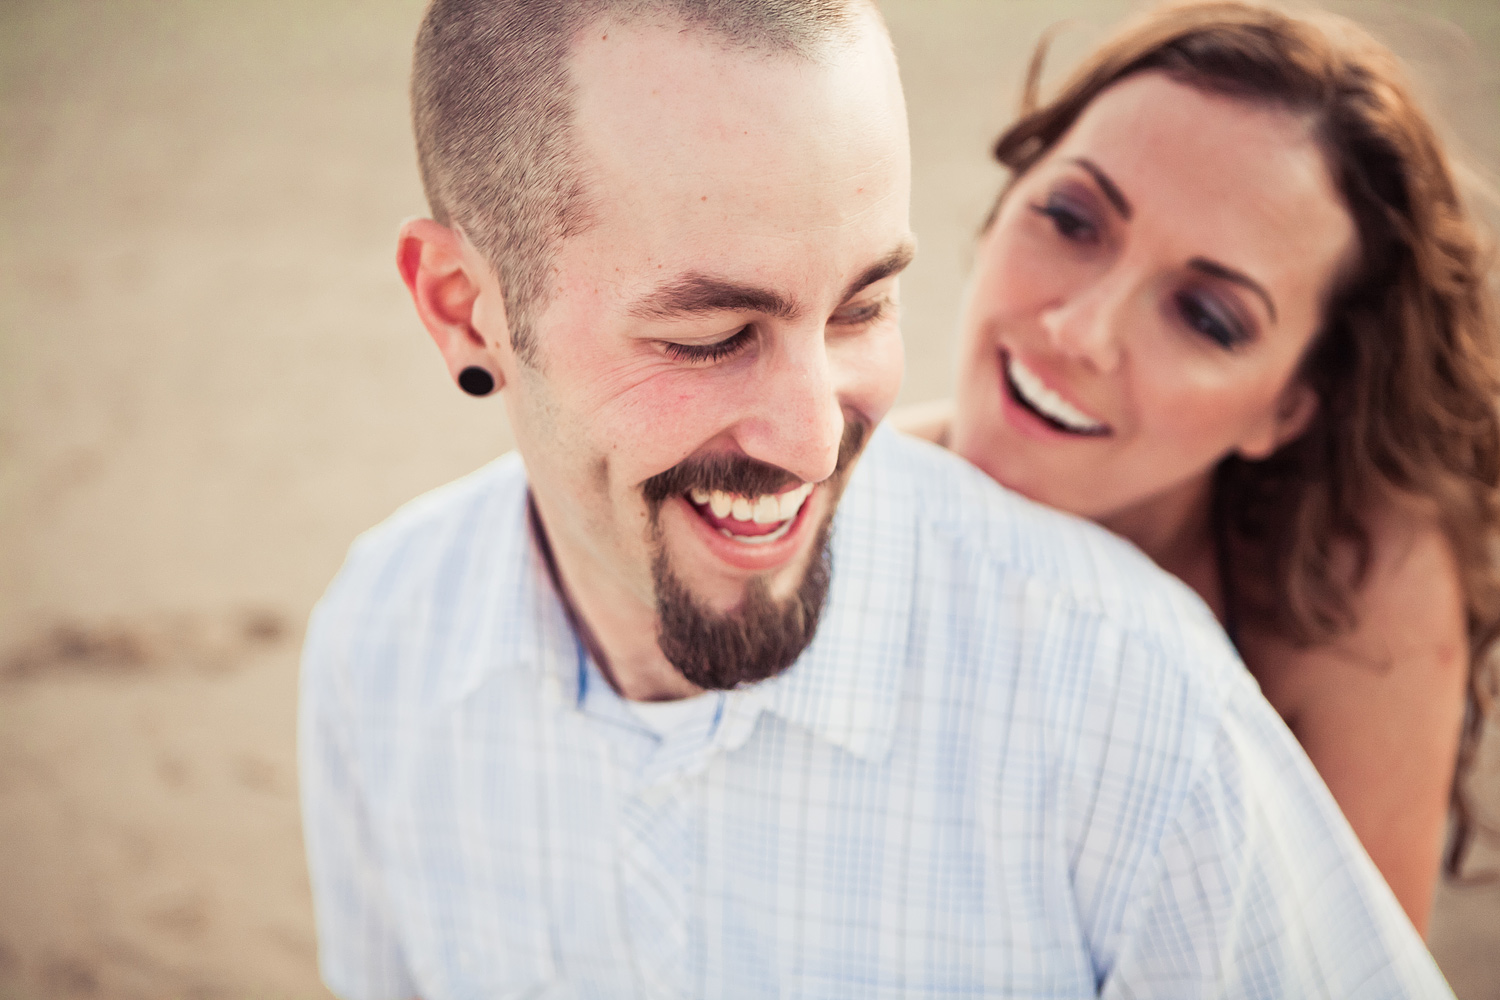 Will Rogers Park Engagement | Stephen Grant Photography